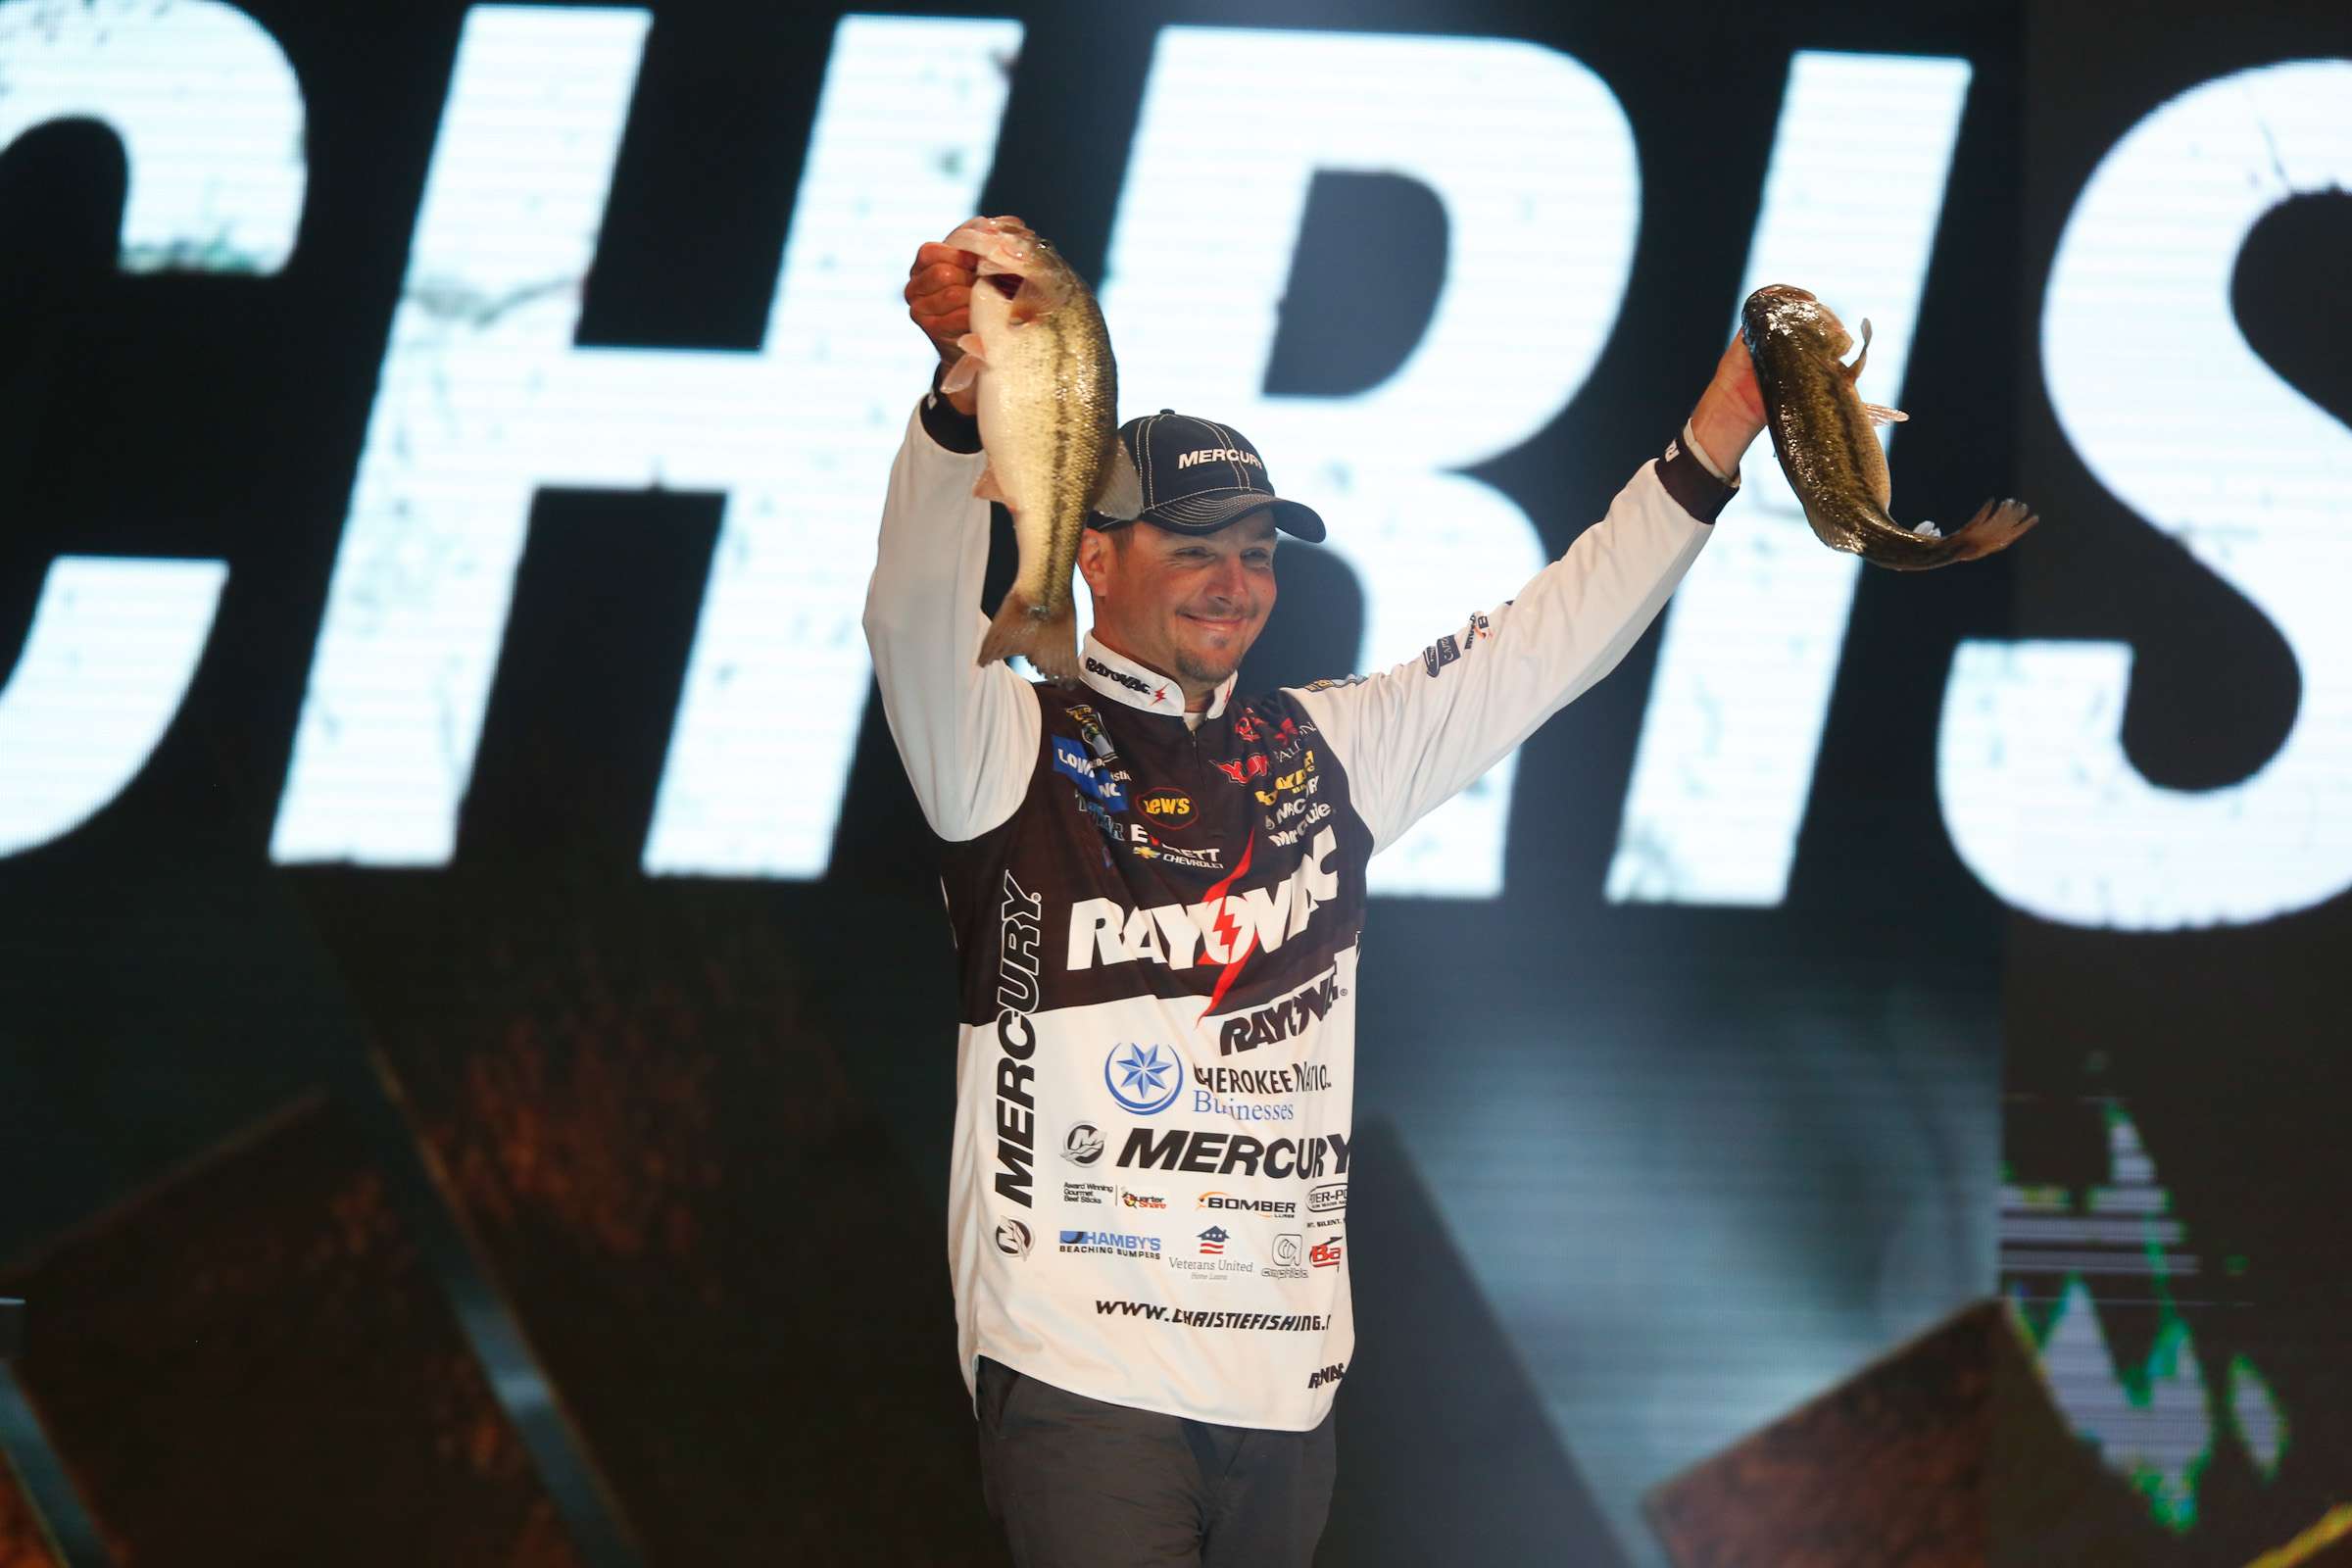 The Park Hill, Okla., angler was considered one of the favorites on nearby Grand Lake O' the Cherokees in 2013, even though it was his first Classic appearance. He came close to the title, moving up from 6th on Day 1 to 5th on Day 2 before finishing 7th.